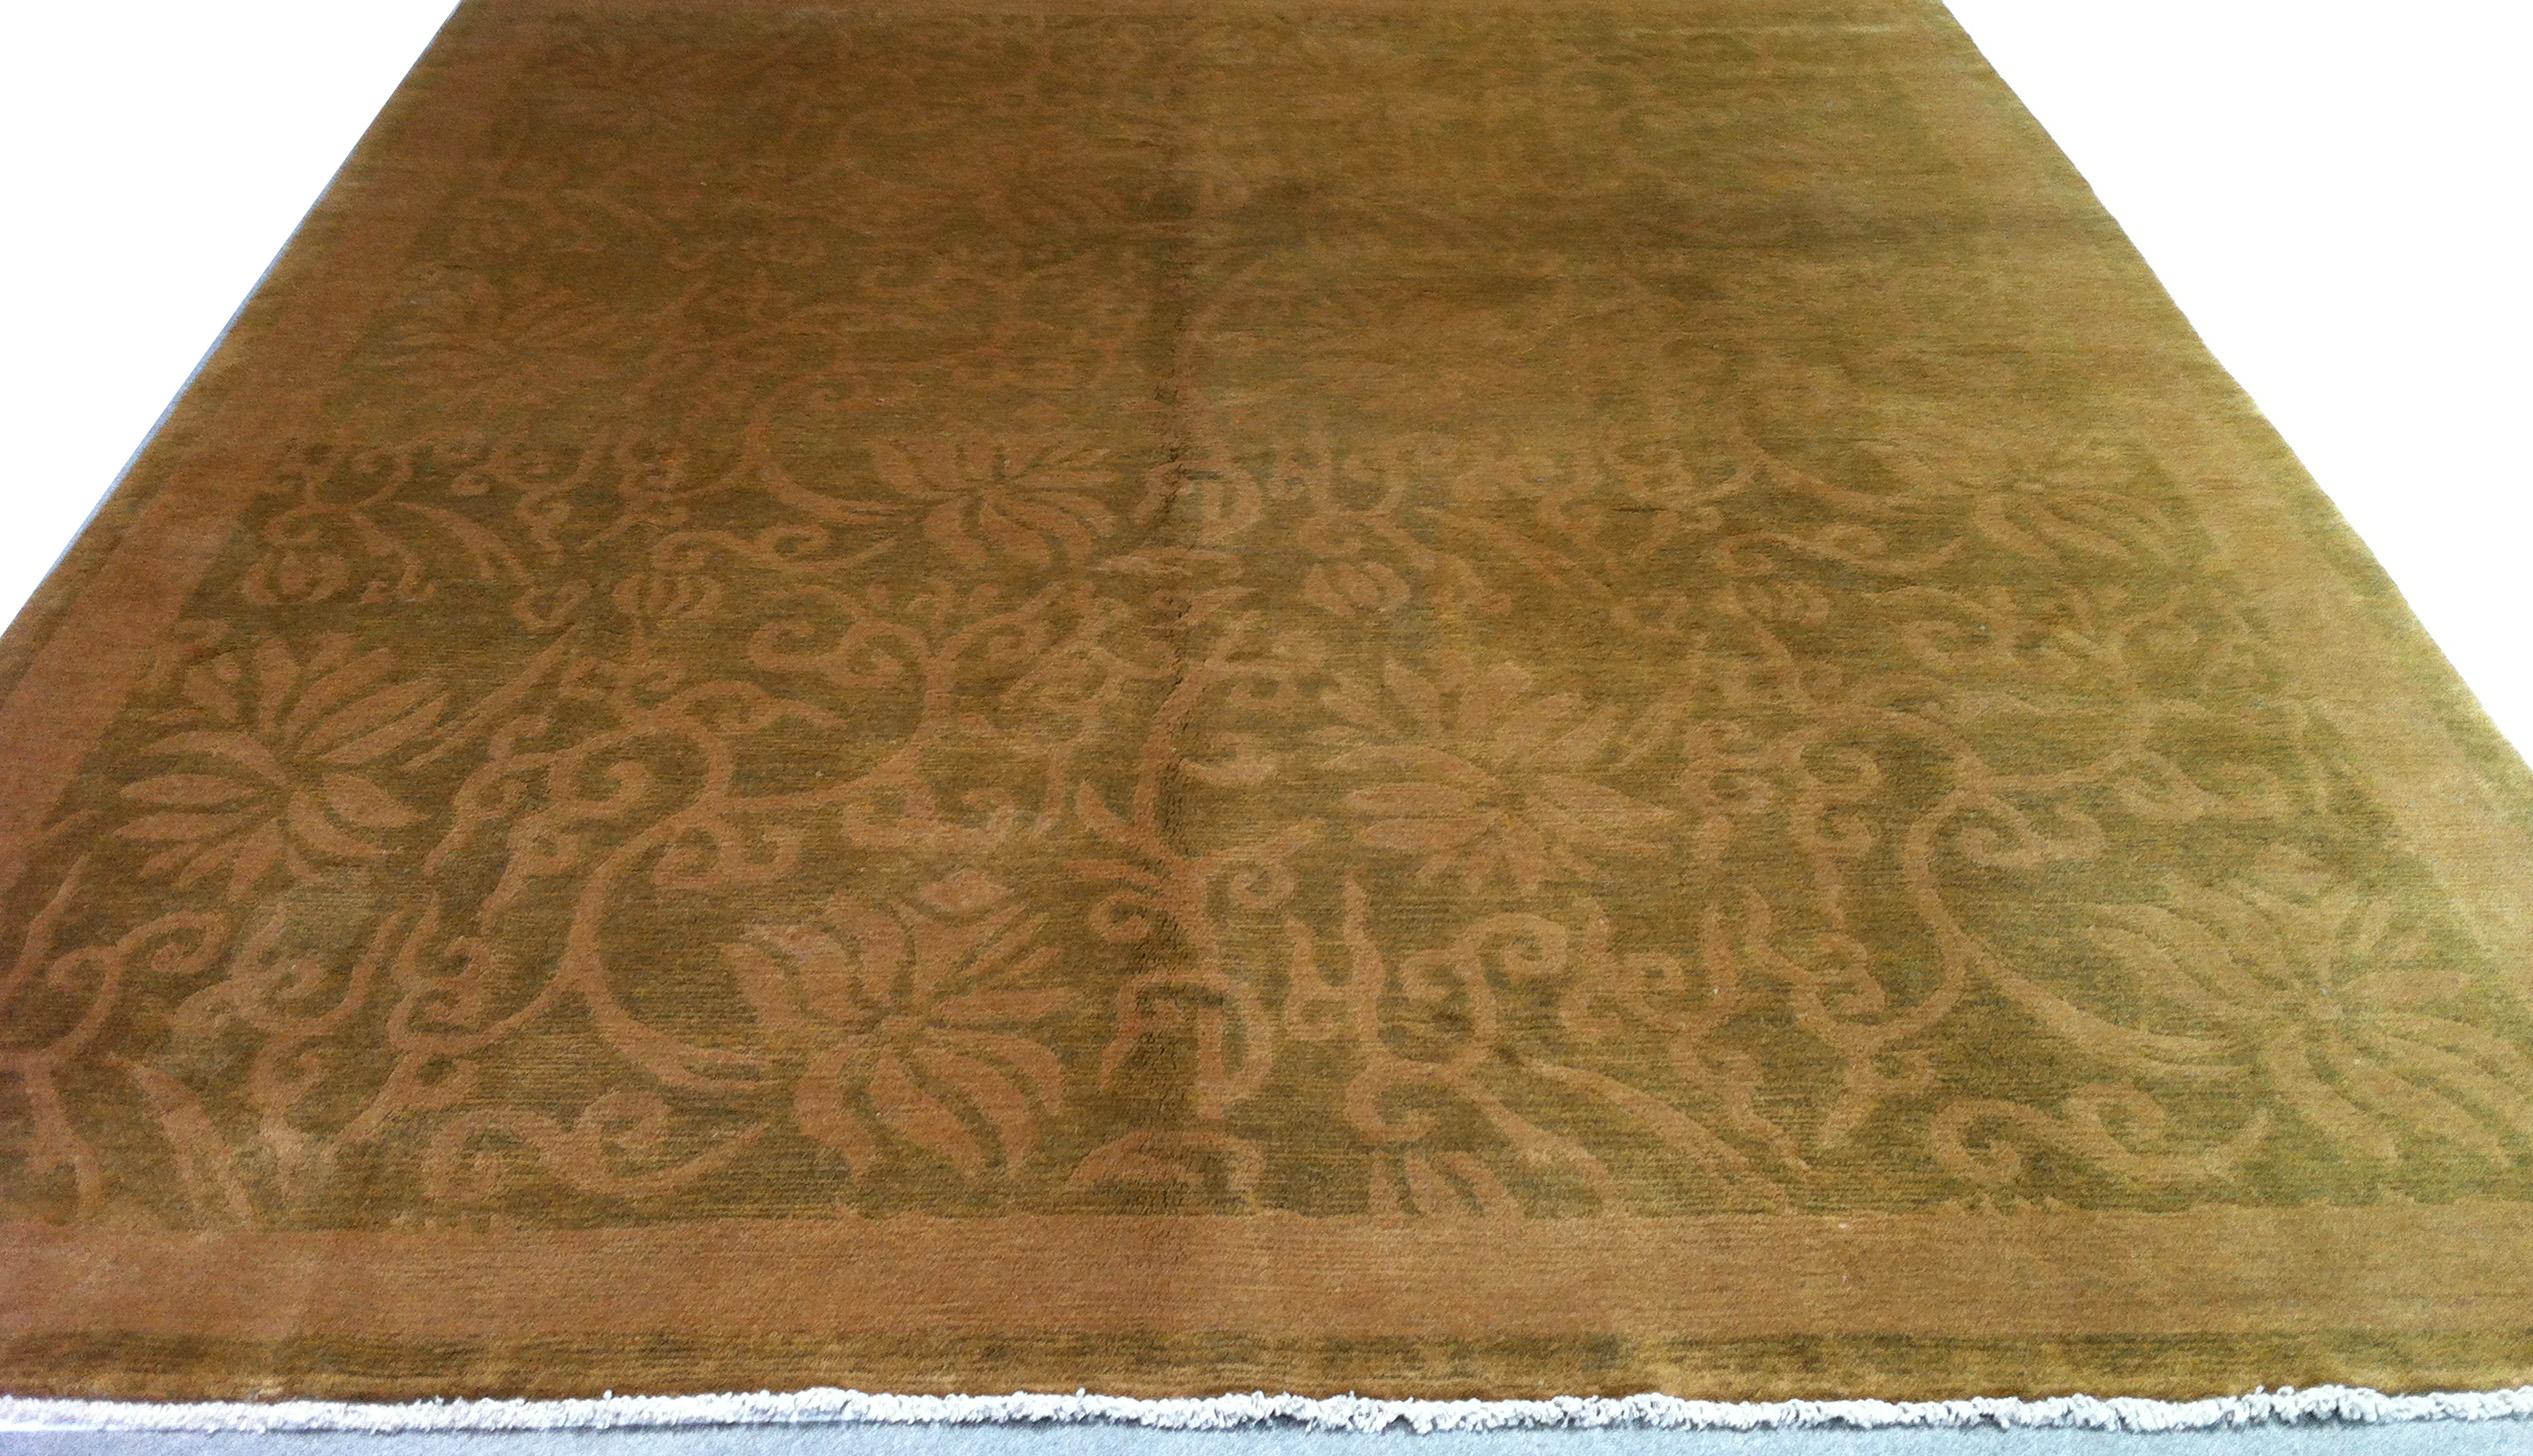 An antique wash creates a wonderfully warm patina in this hand knotted wool rug from Nepal. The subtle floral pattern in the large center panel brings just the right amount of traditional to a rug that will look equally at home in more contemporary